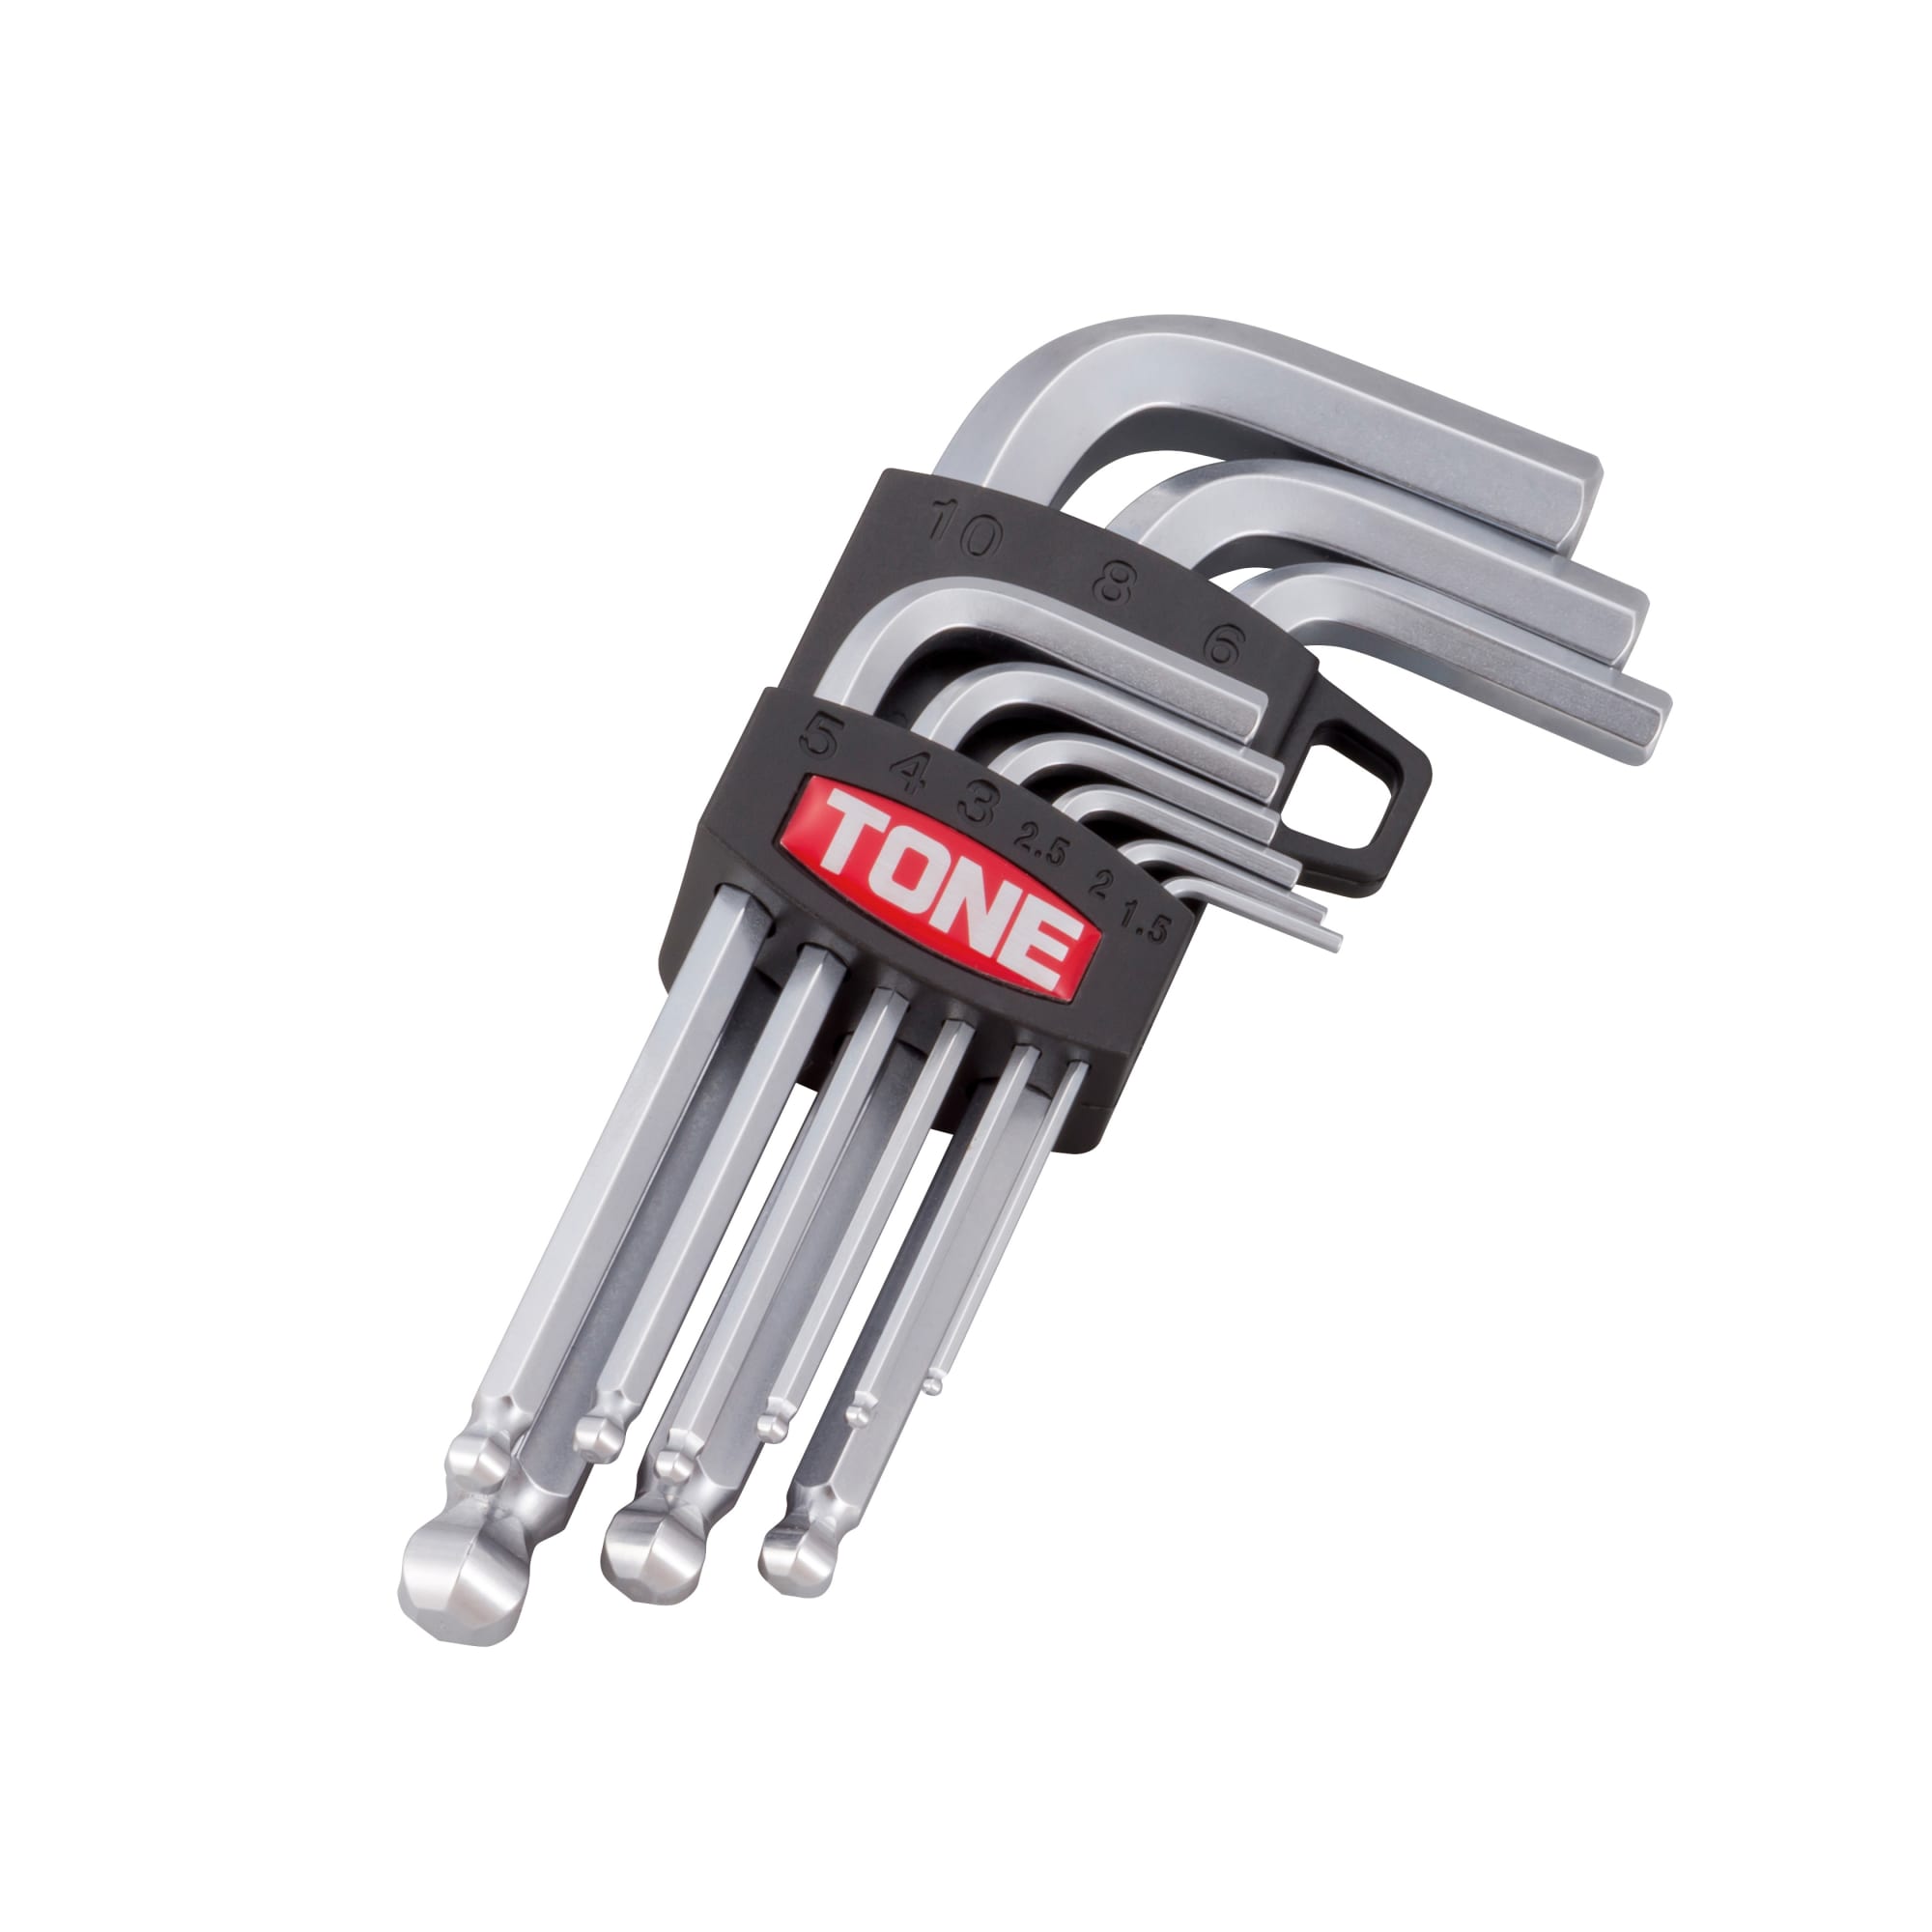 New Lon0167 1.5mm-10mm Hexagonal Featured Head Alloy Steel reliable efficacy L Shape Ball End Hex Key Wrench Set 9 in 1 id:876 47 6d e43 